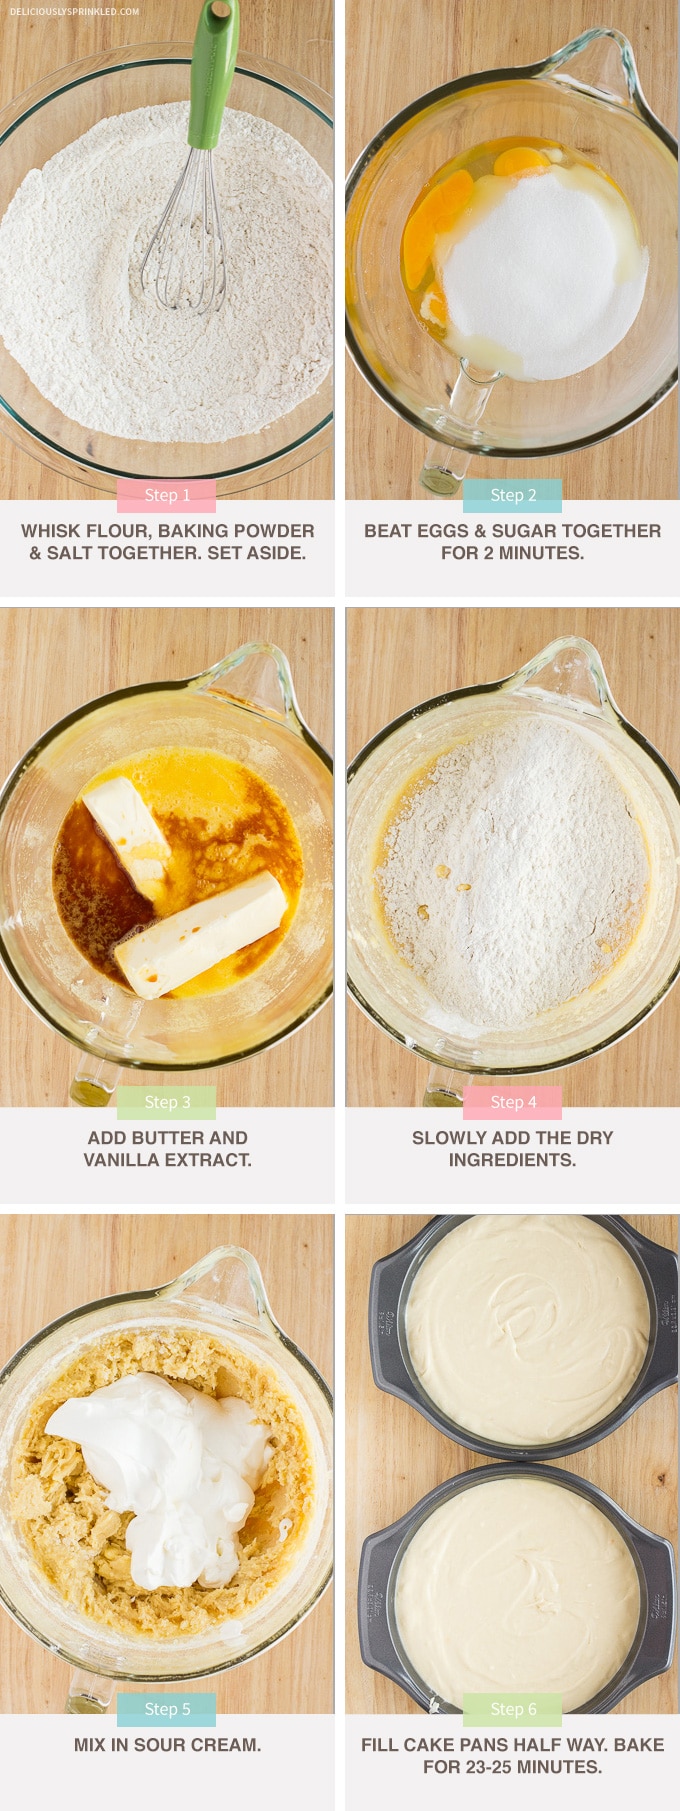 The step by step cake batter instructions are presented in six separate blocks. The first is whisking the dry ingredients, the second is beating eggs and sugar, the third is adding butter and vanilla, the fourth is combining the wet and dry, the fifth is adding sour cream, and the last image is of two cake pans filled with batter. 